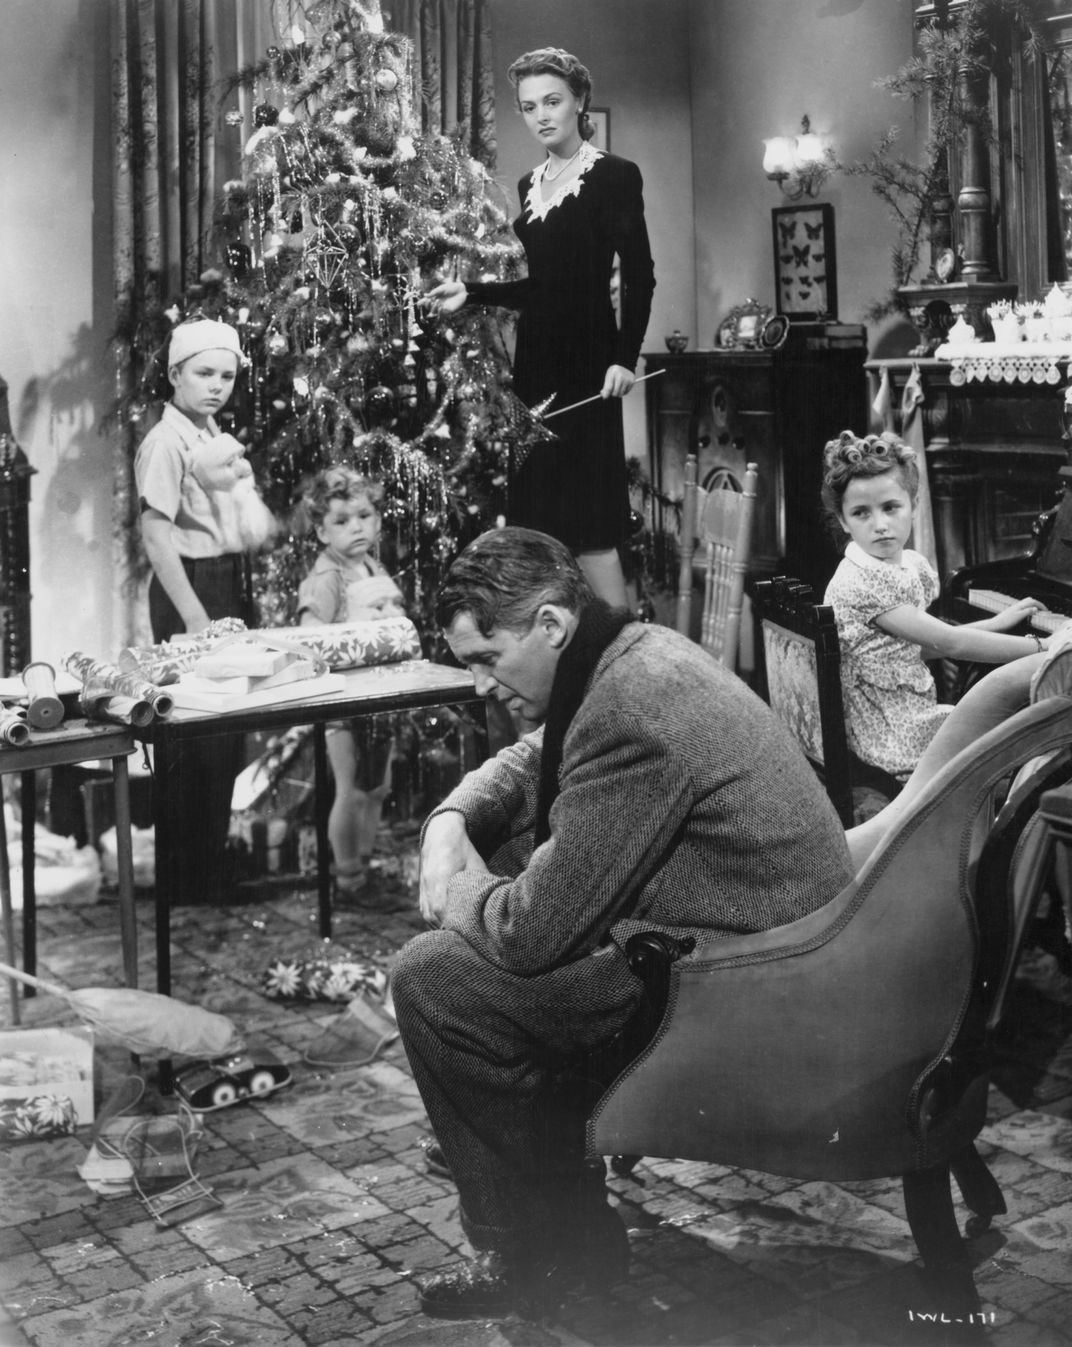 George Bailey sits in a chair in his living room, surrounded by his wife and children